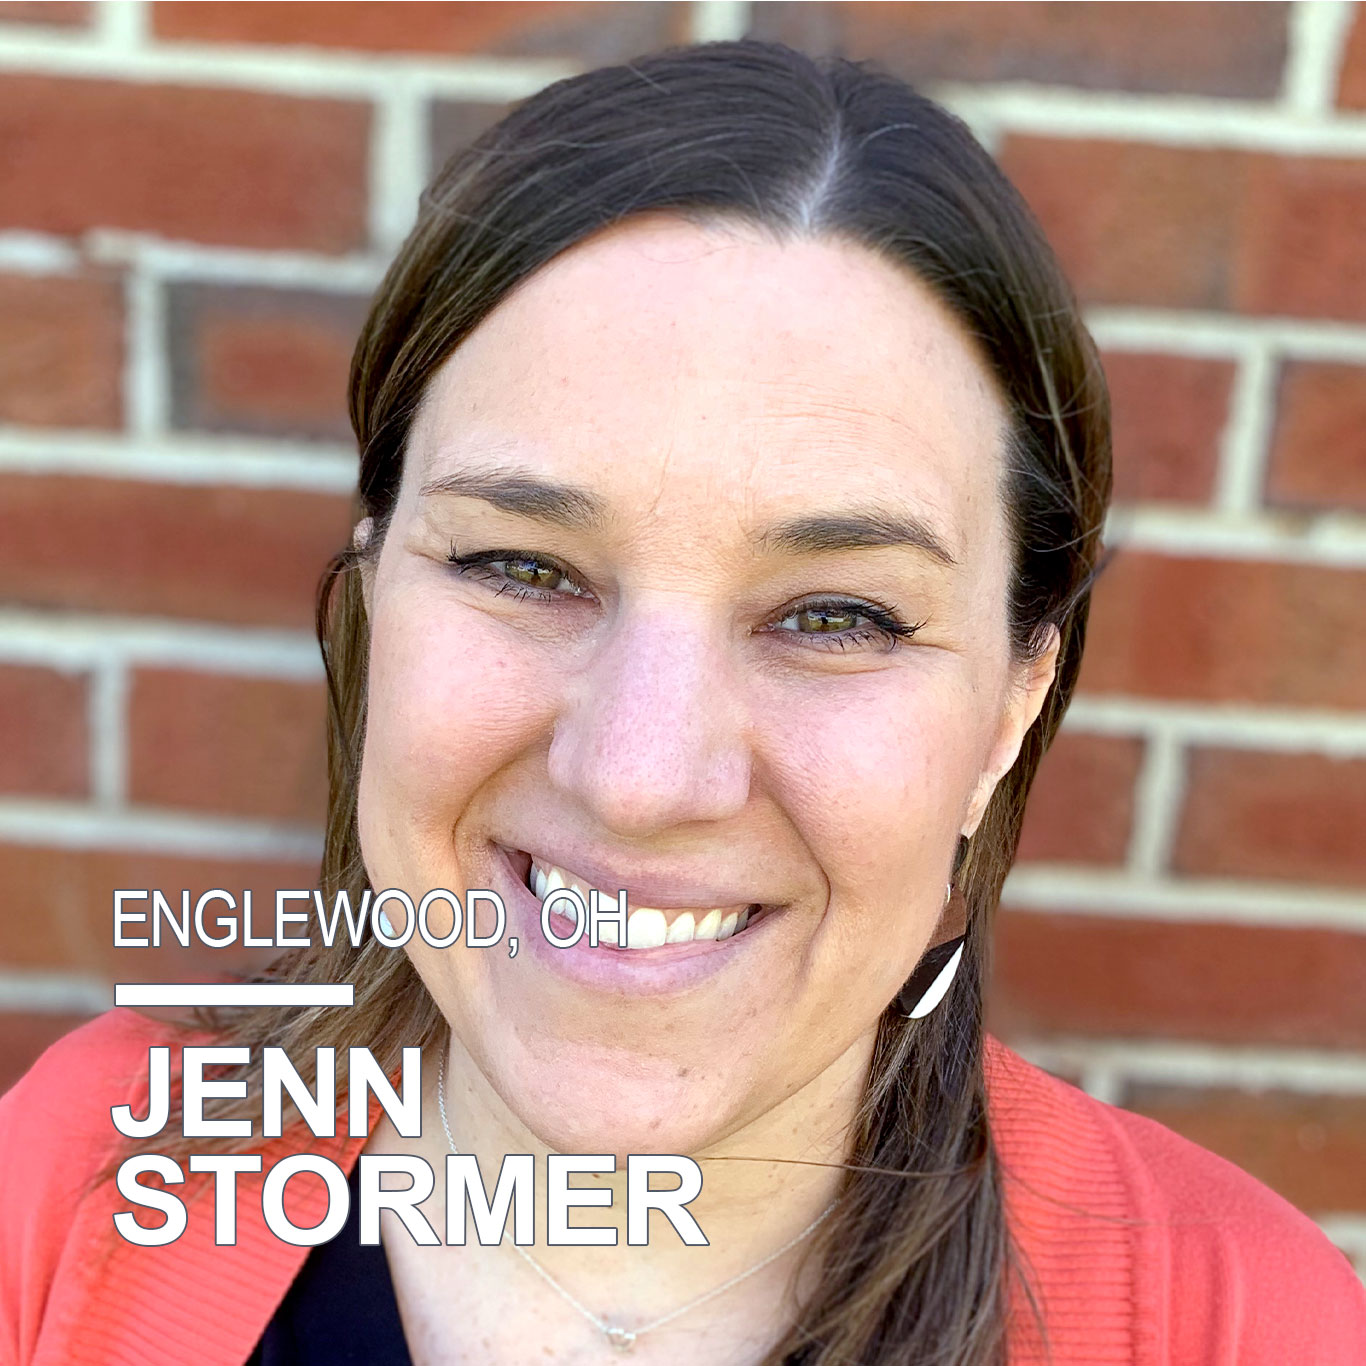 Jenn Stormer is the Grades 3-6 STEM and science teacher at Northmoor Elementary in Englewood, Ohio, and an elementary curriculum specialist for Air Camp USA. She has a bachelor of science in Elementary Education and a master of education in Educational Leadership. Jenn was a 2020 ExploraVision Coach/National Winner and the 2022 Ohio District Three Teacher of the Year and has been an Ohio Master Teacher since 2016. Experiences with wonderful teachers gave her the desire to become a teacher. Jenn is passionate about STEM education, equity in education, and diversifying representation in STEM.